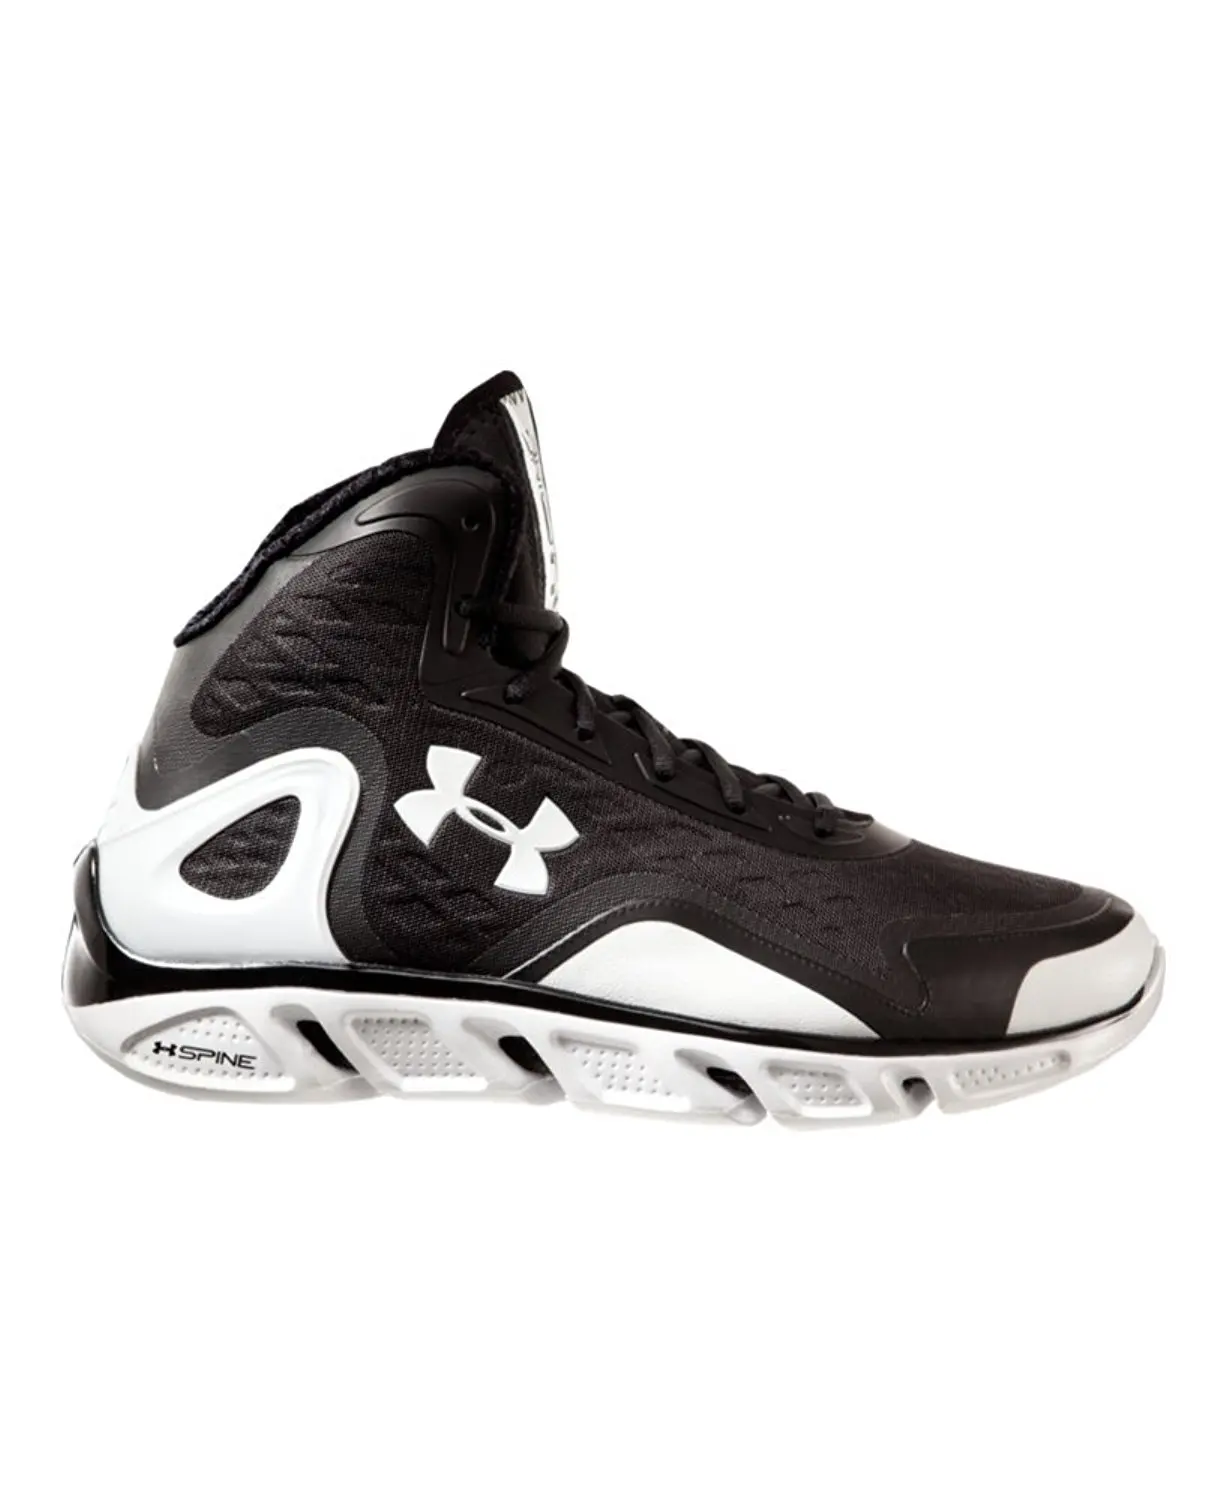 Buy Under Armour Mens UA Spine Bionic 